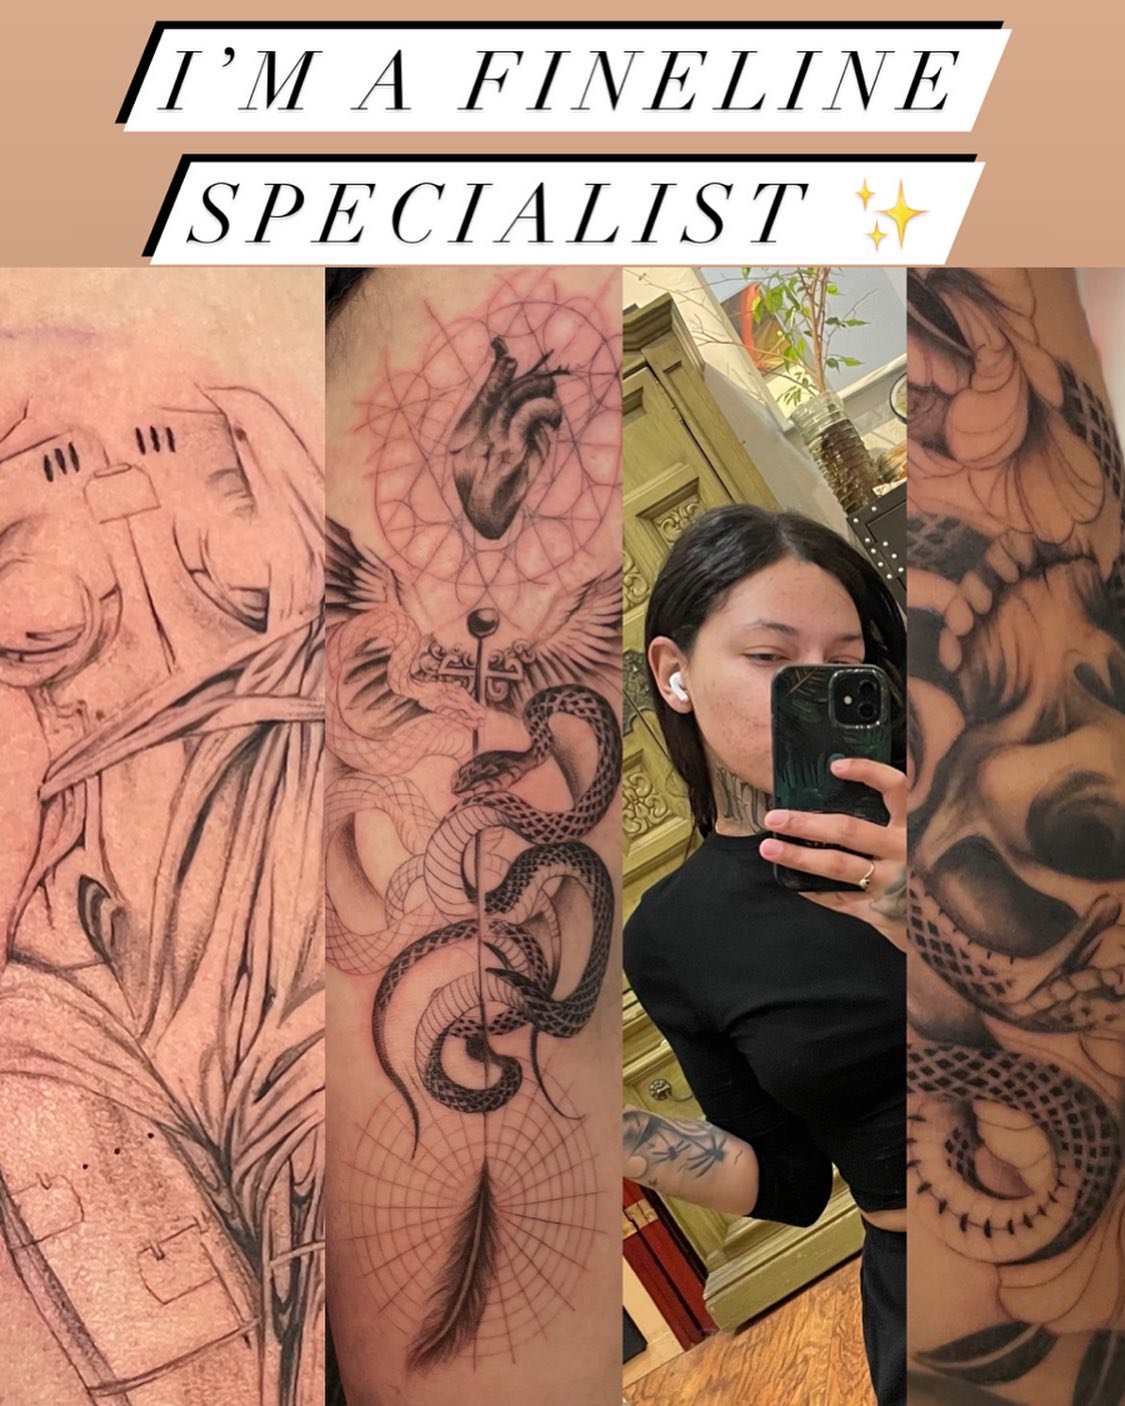 Hey! I work here at the shop and I specialize in fine line tattoos, posted here before but never made an introduction, my instagram is @tattoosbyiv feel free to email ivtattoo.1@gmail.com for inquiries and questions! ✨